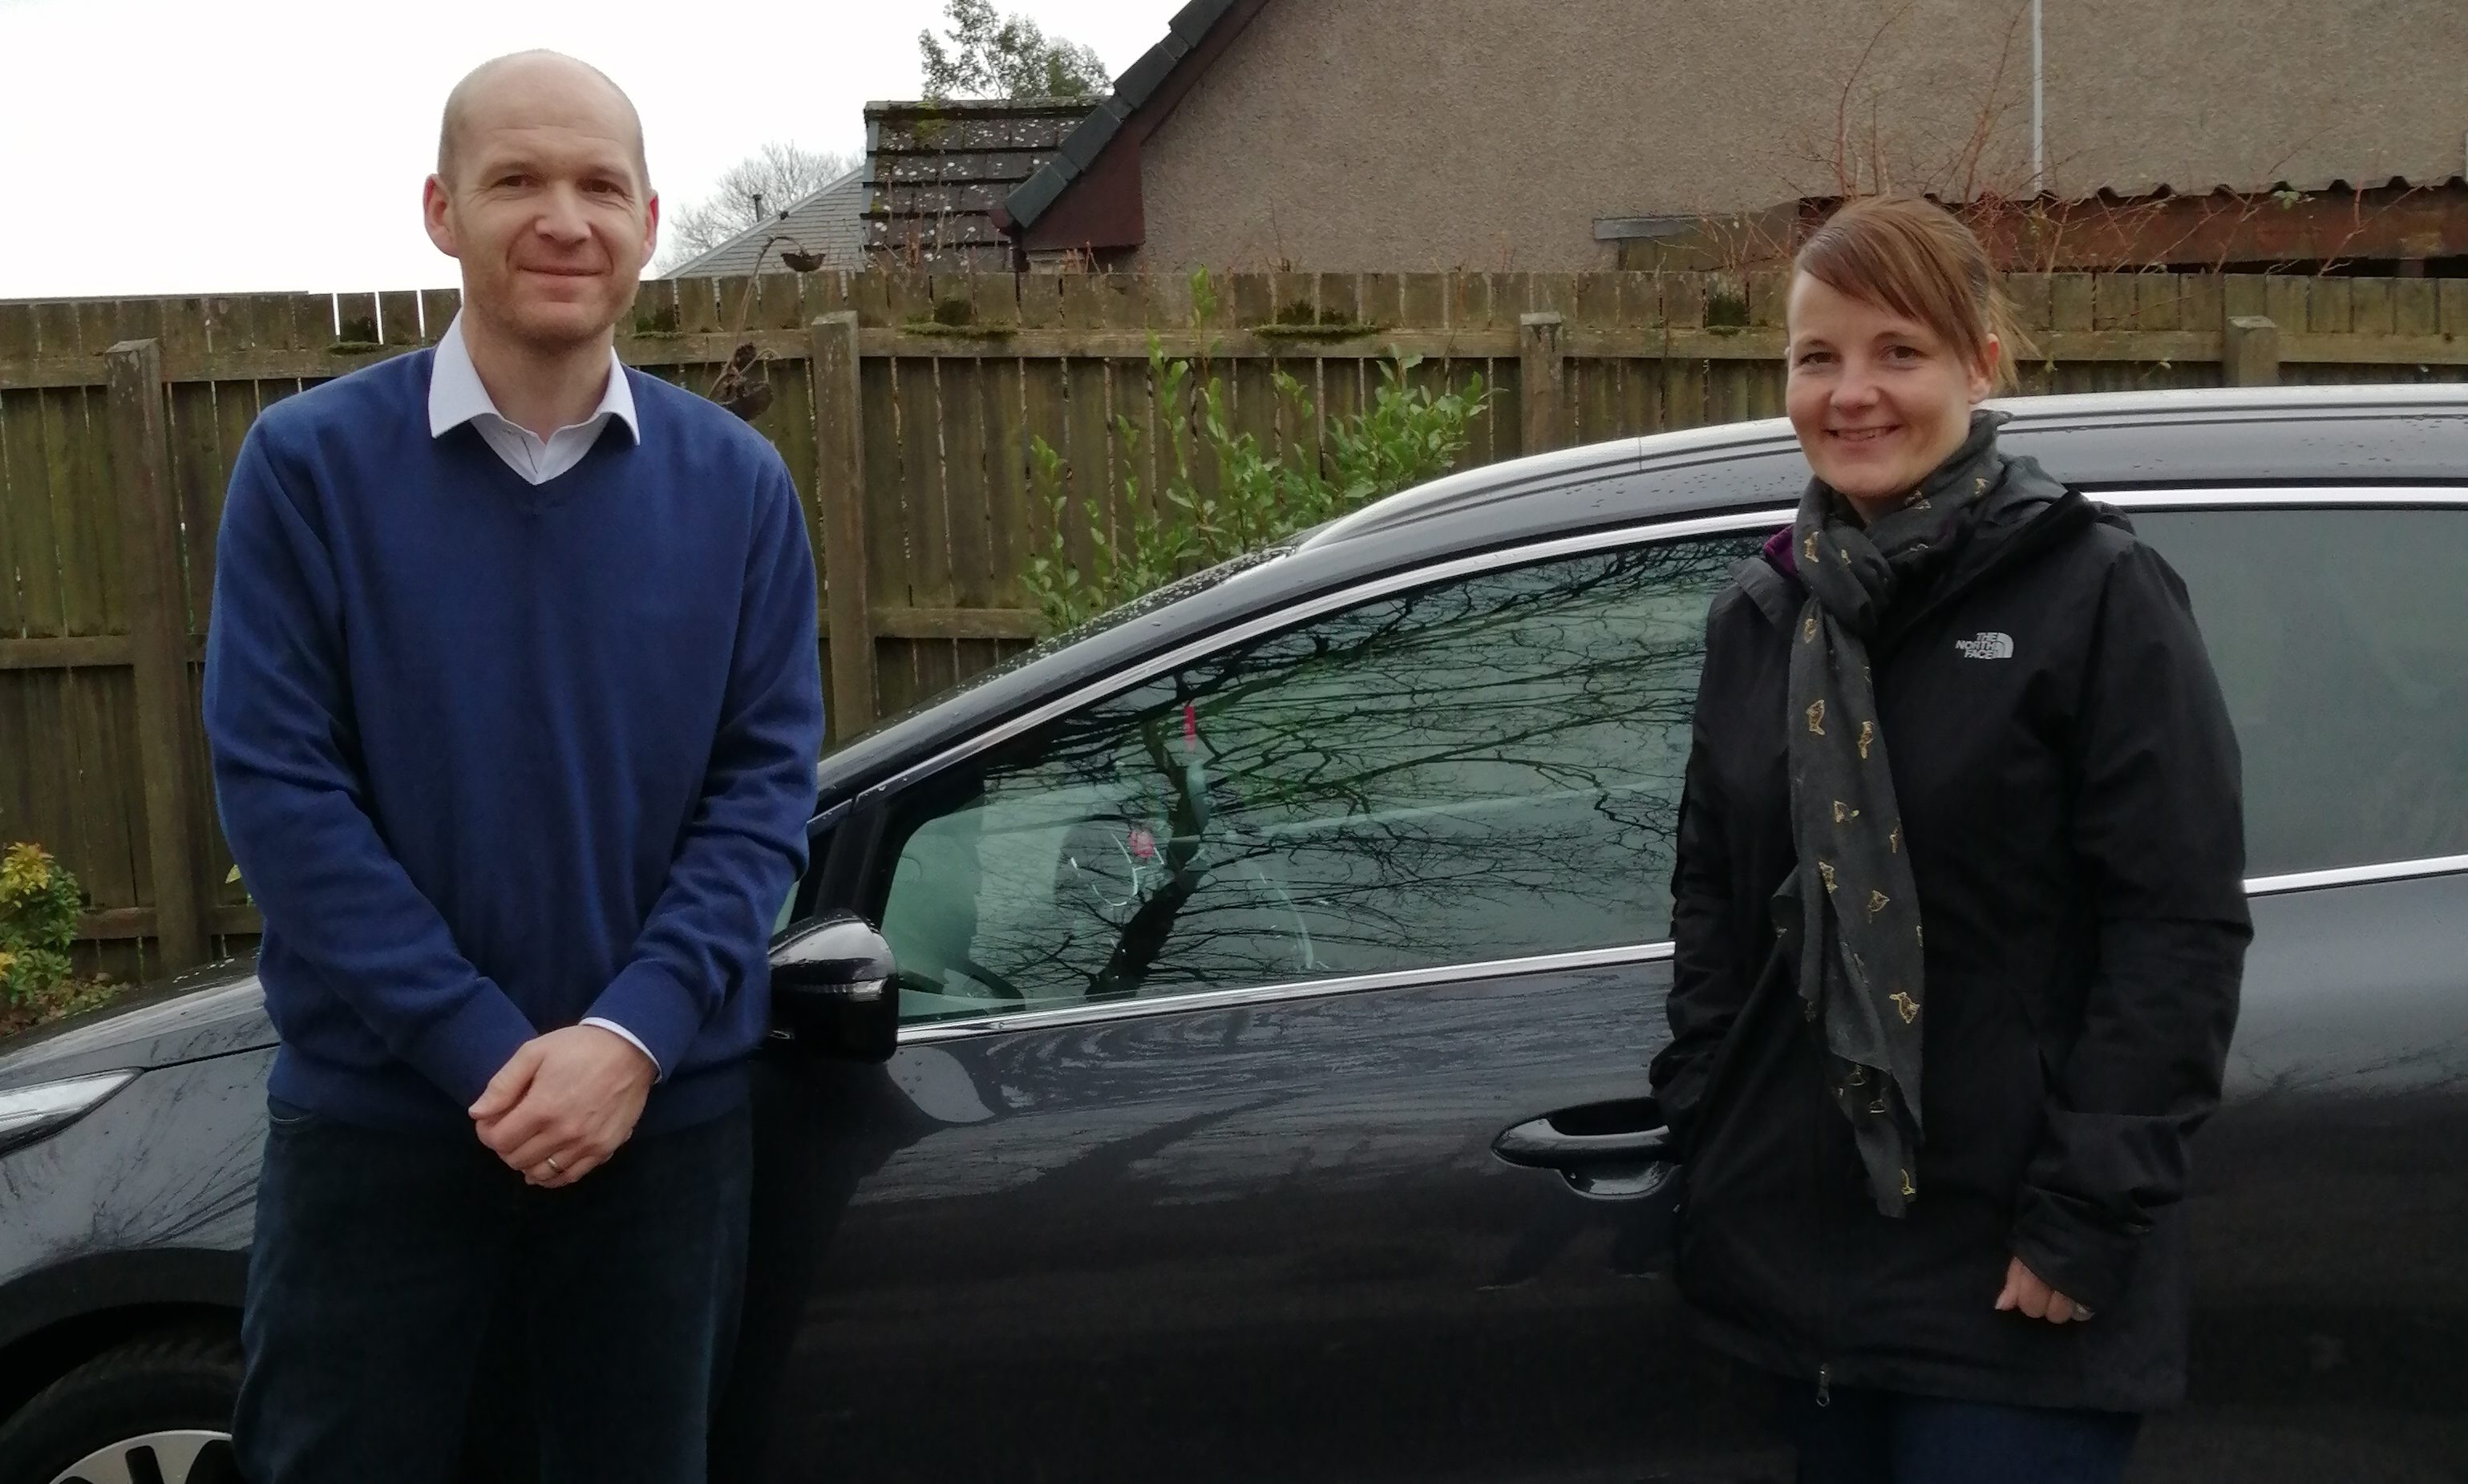 Nikki Murray collects the repaired vehicle from Perth College lecturer Duncan Reid.